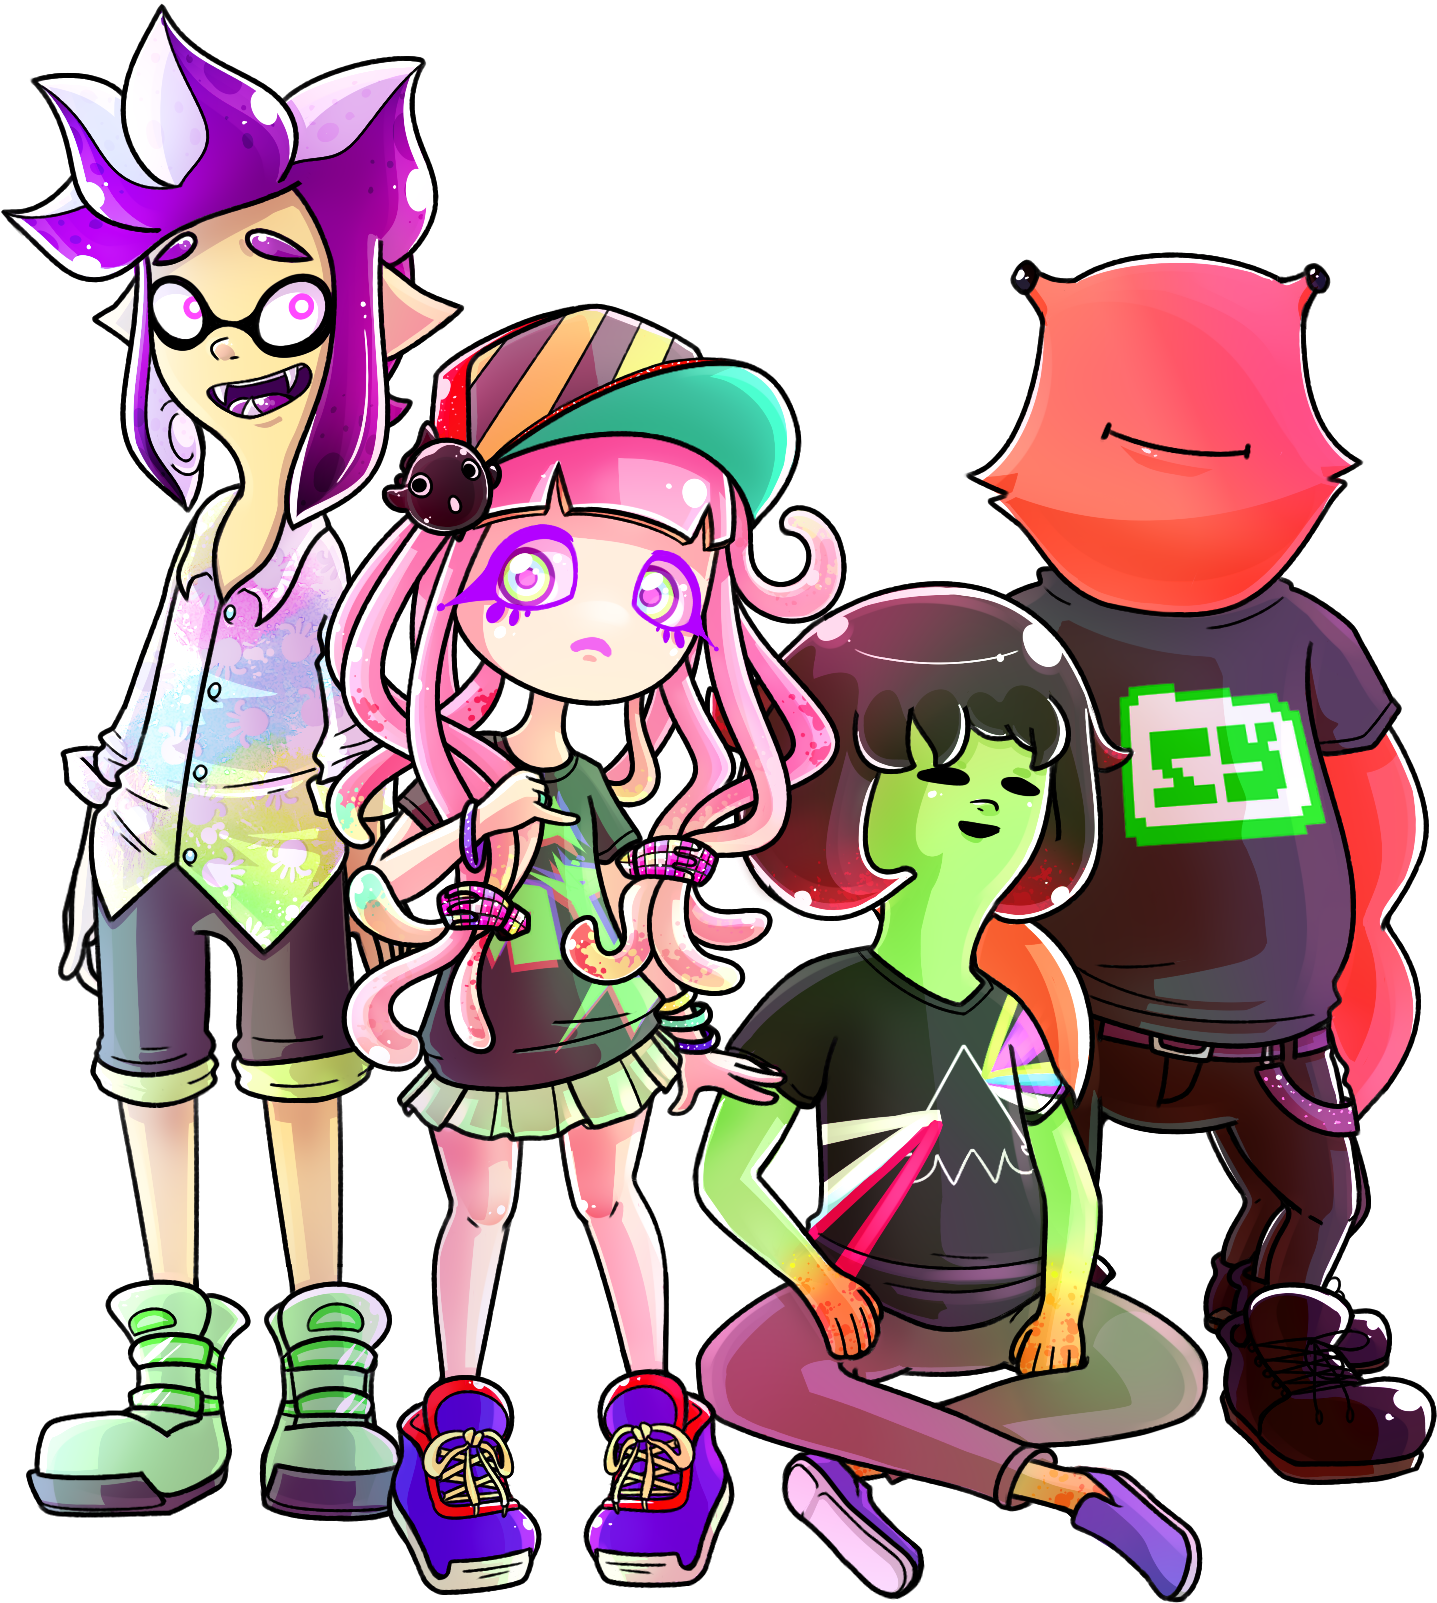 abxy_by_ghiraham_sandwich-d94t8vg.png